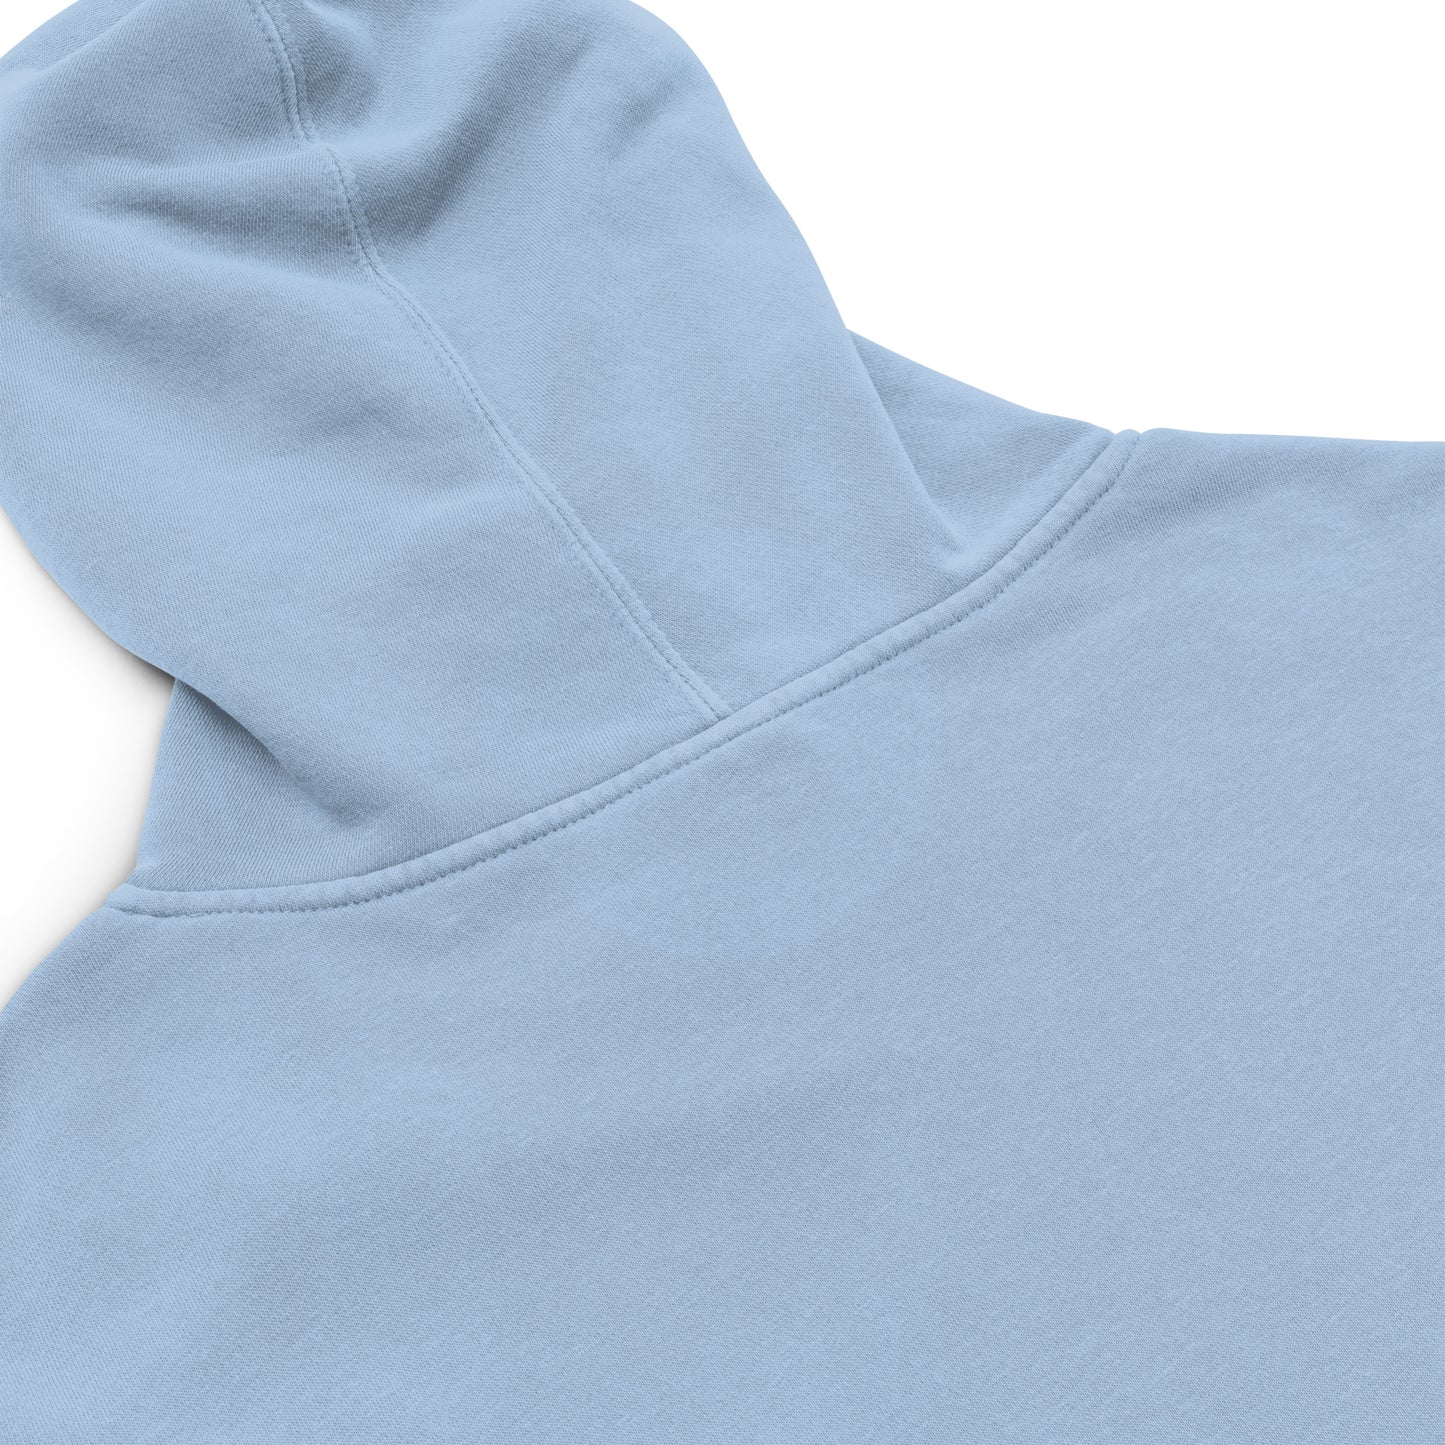 FOH Unisex pigment-dyed hoodie [F.3]